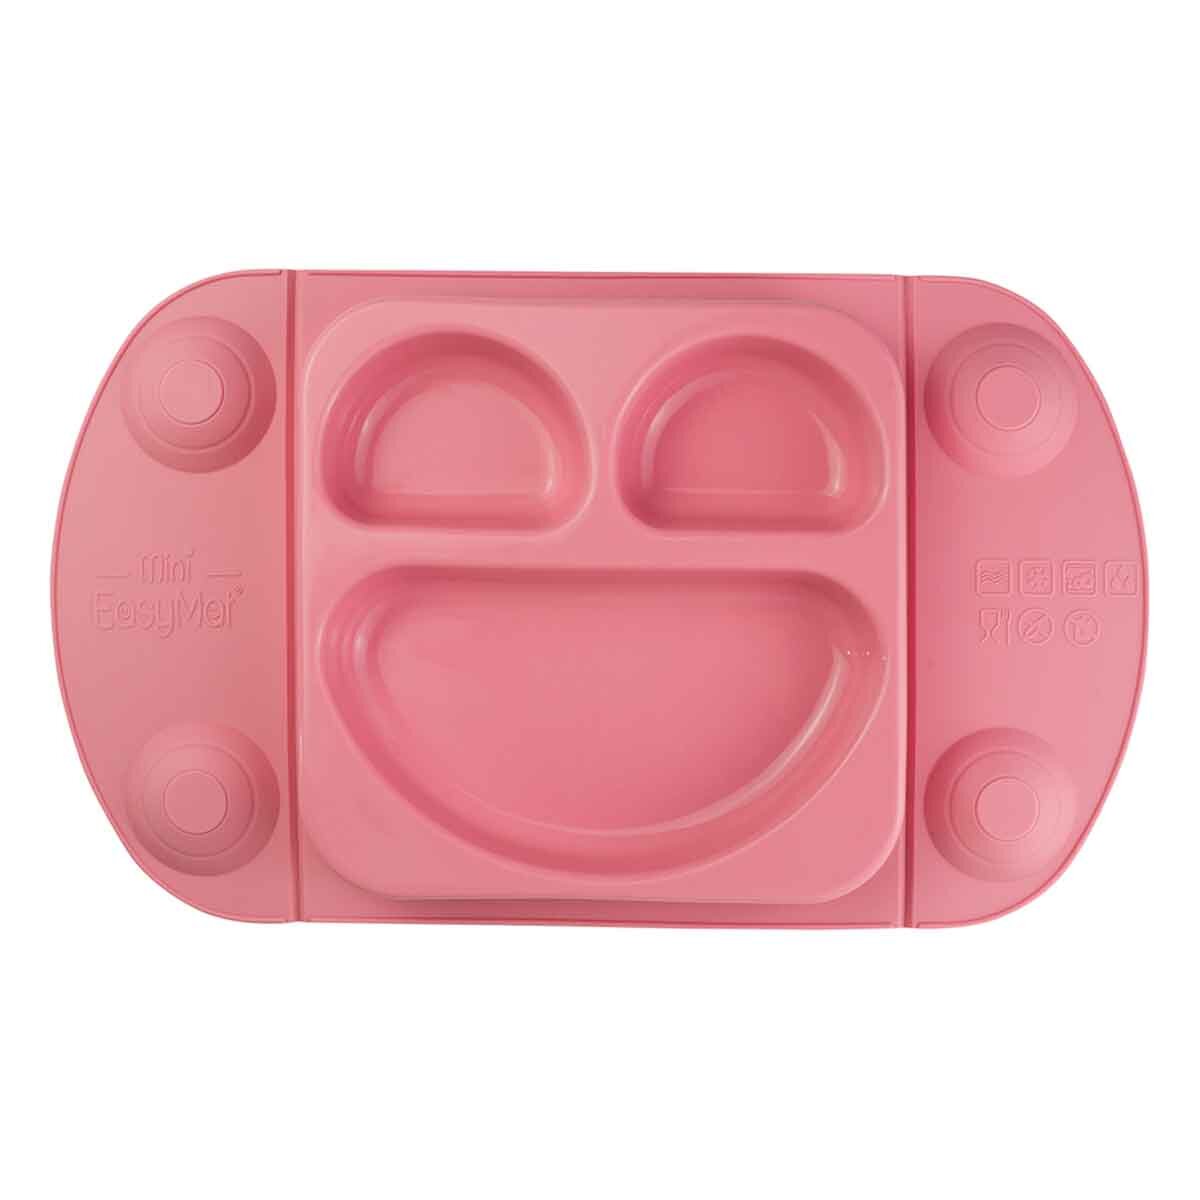 EasyTots EasyMat Mini Divided Suction Weaning Plate in Pink